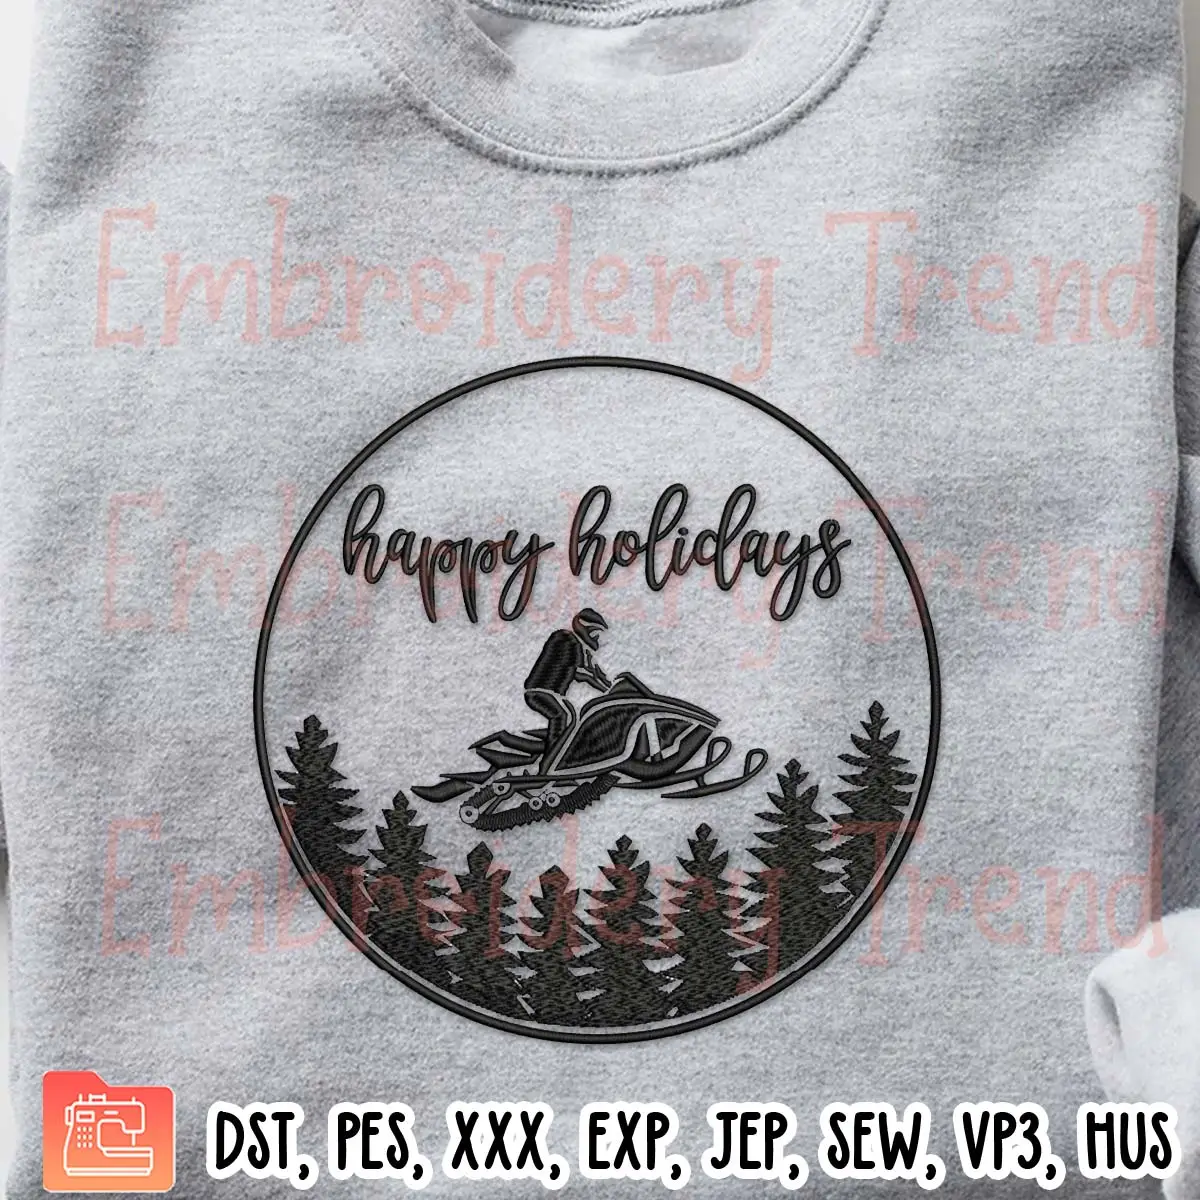 Happy Holidays Snowmobile Embroidery Design, Snowmobile Rider Embroidery Digitizing Pes File